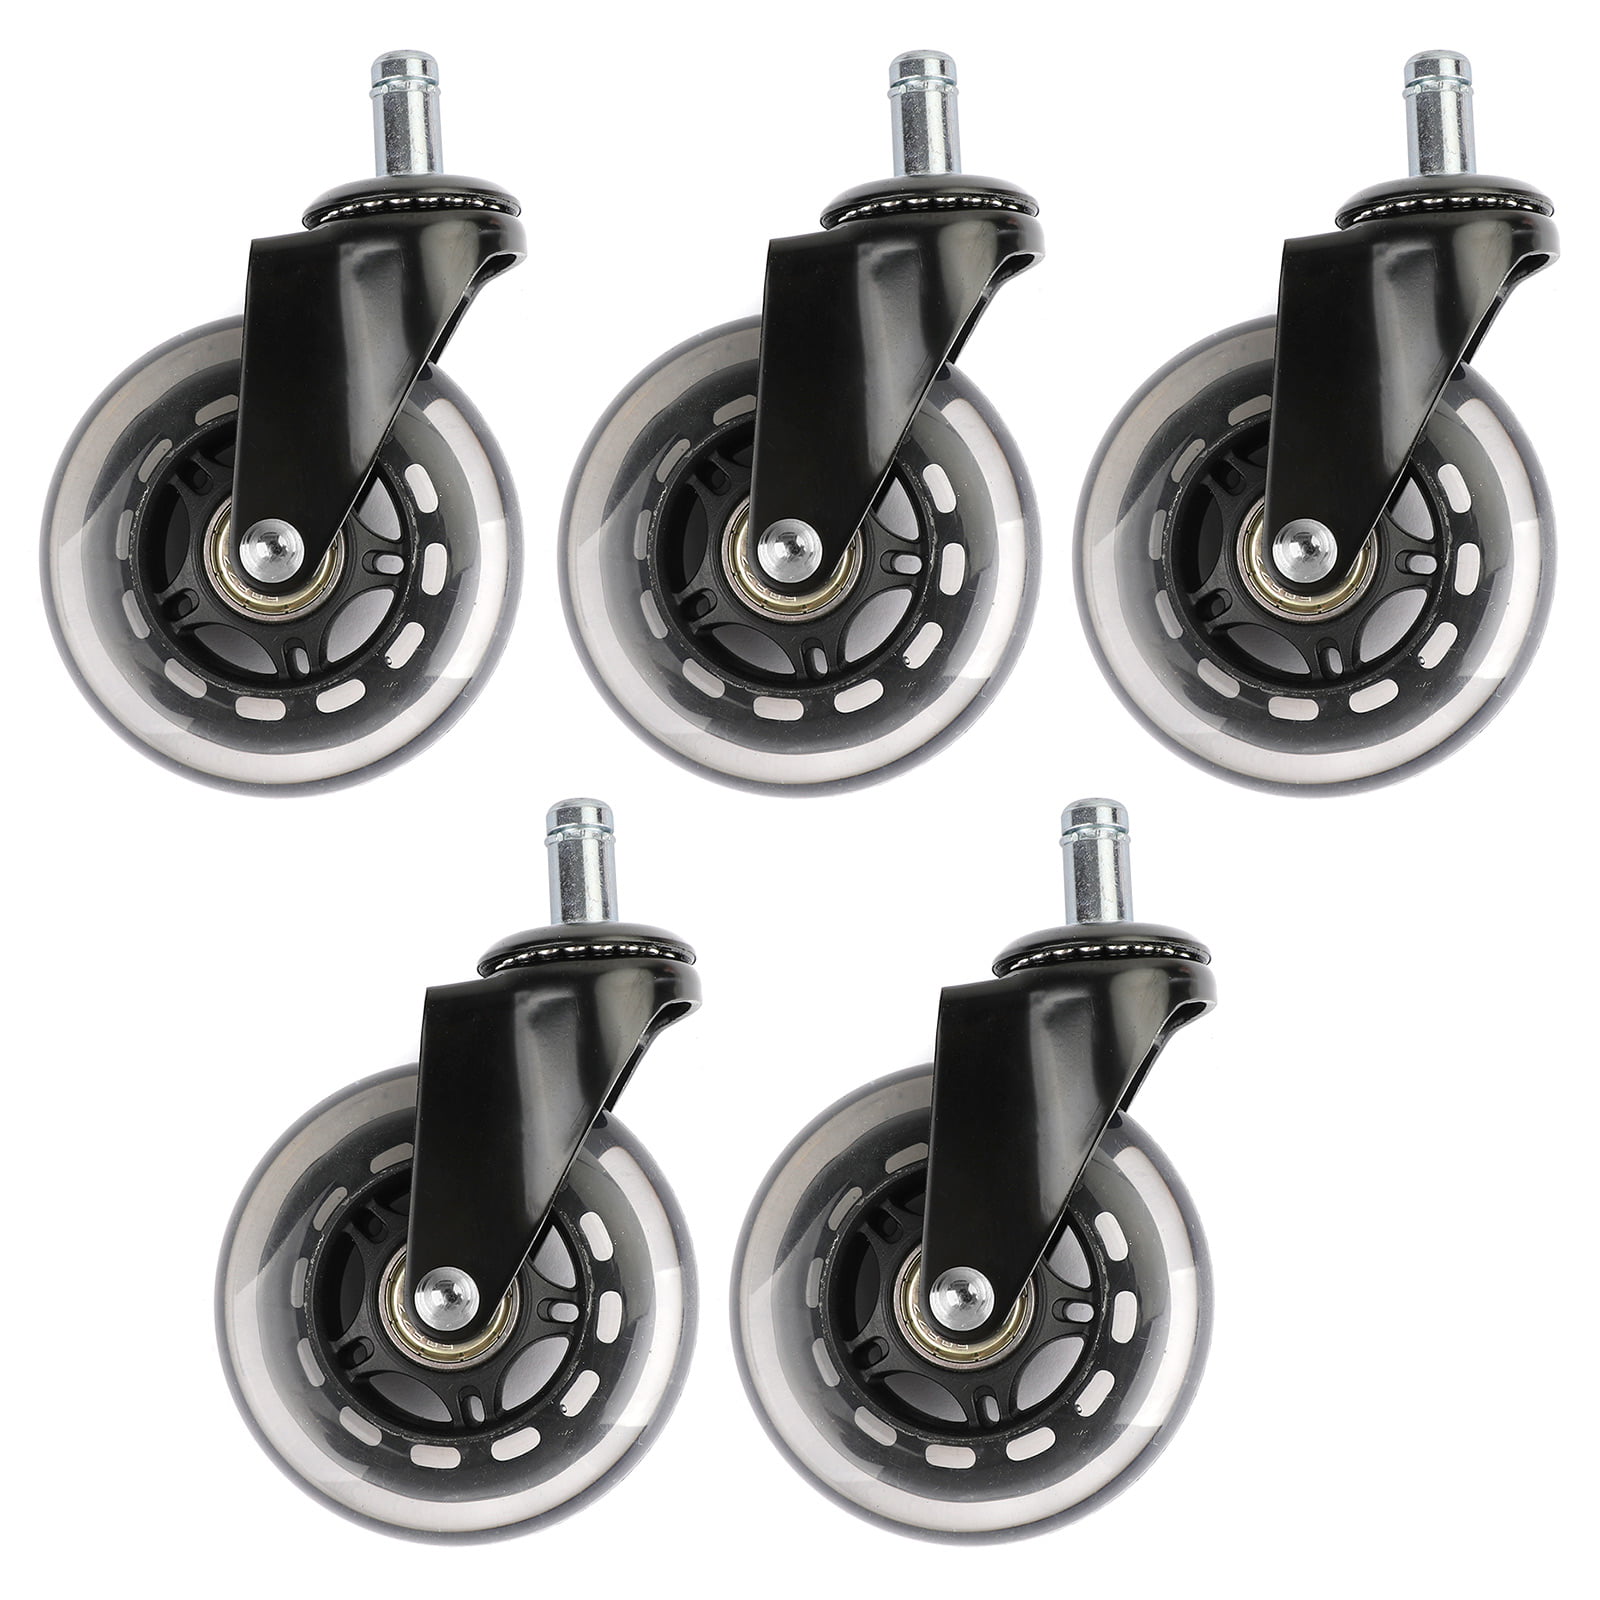 Set of 5 3 inch Office Chair Caster Rubber Swivel Wheels Replacement Heavy Duty 